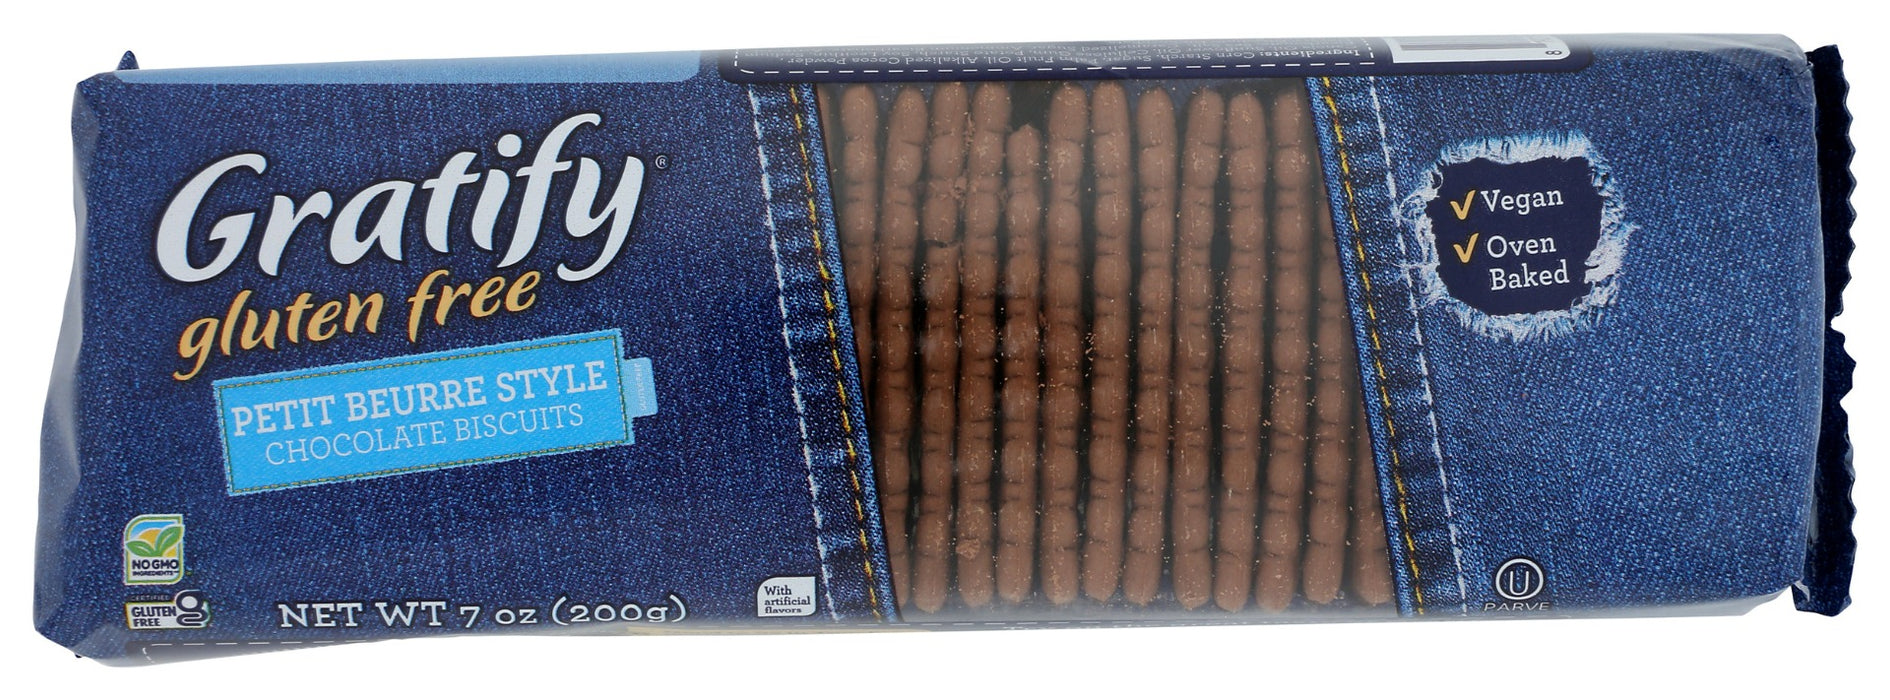 GRATIFY: Chocolate Biscuits, 7.01 oz